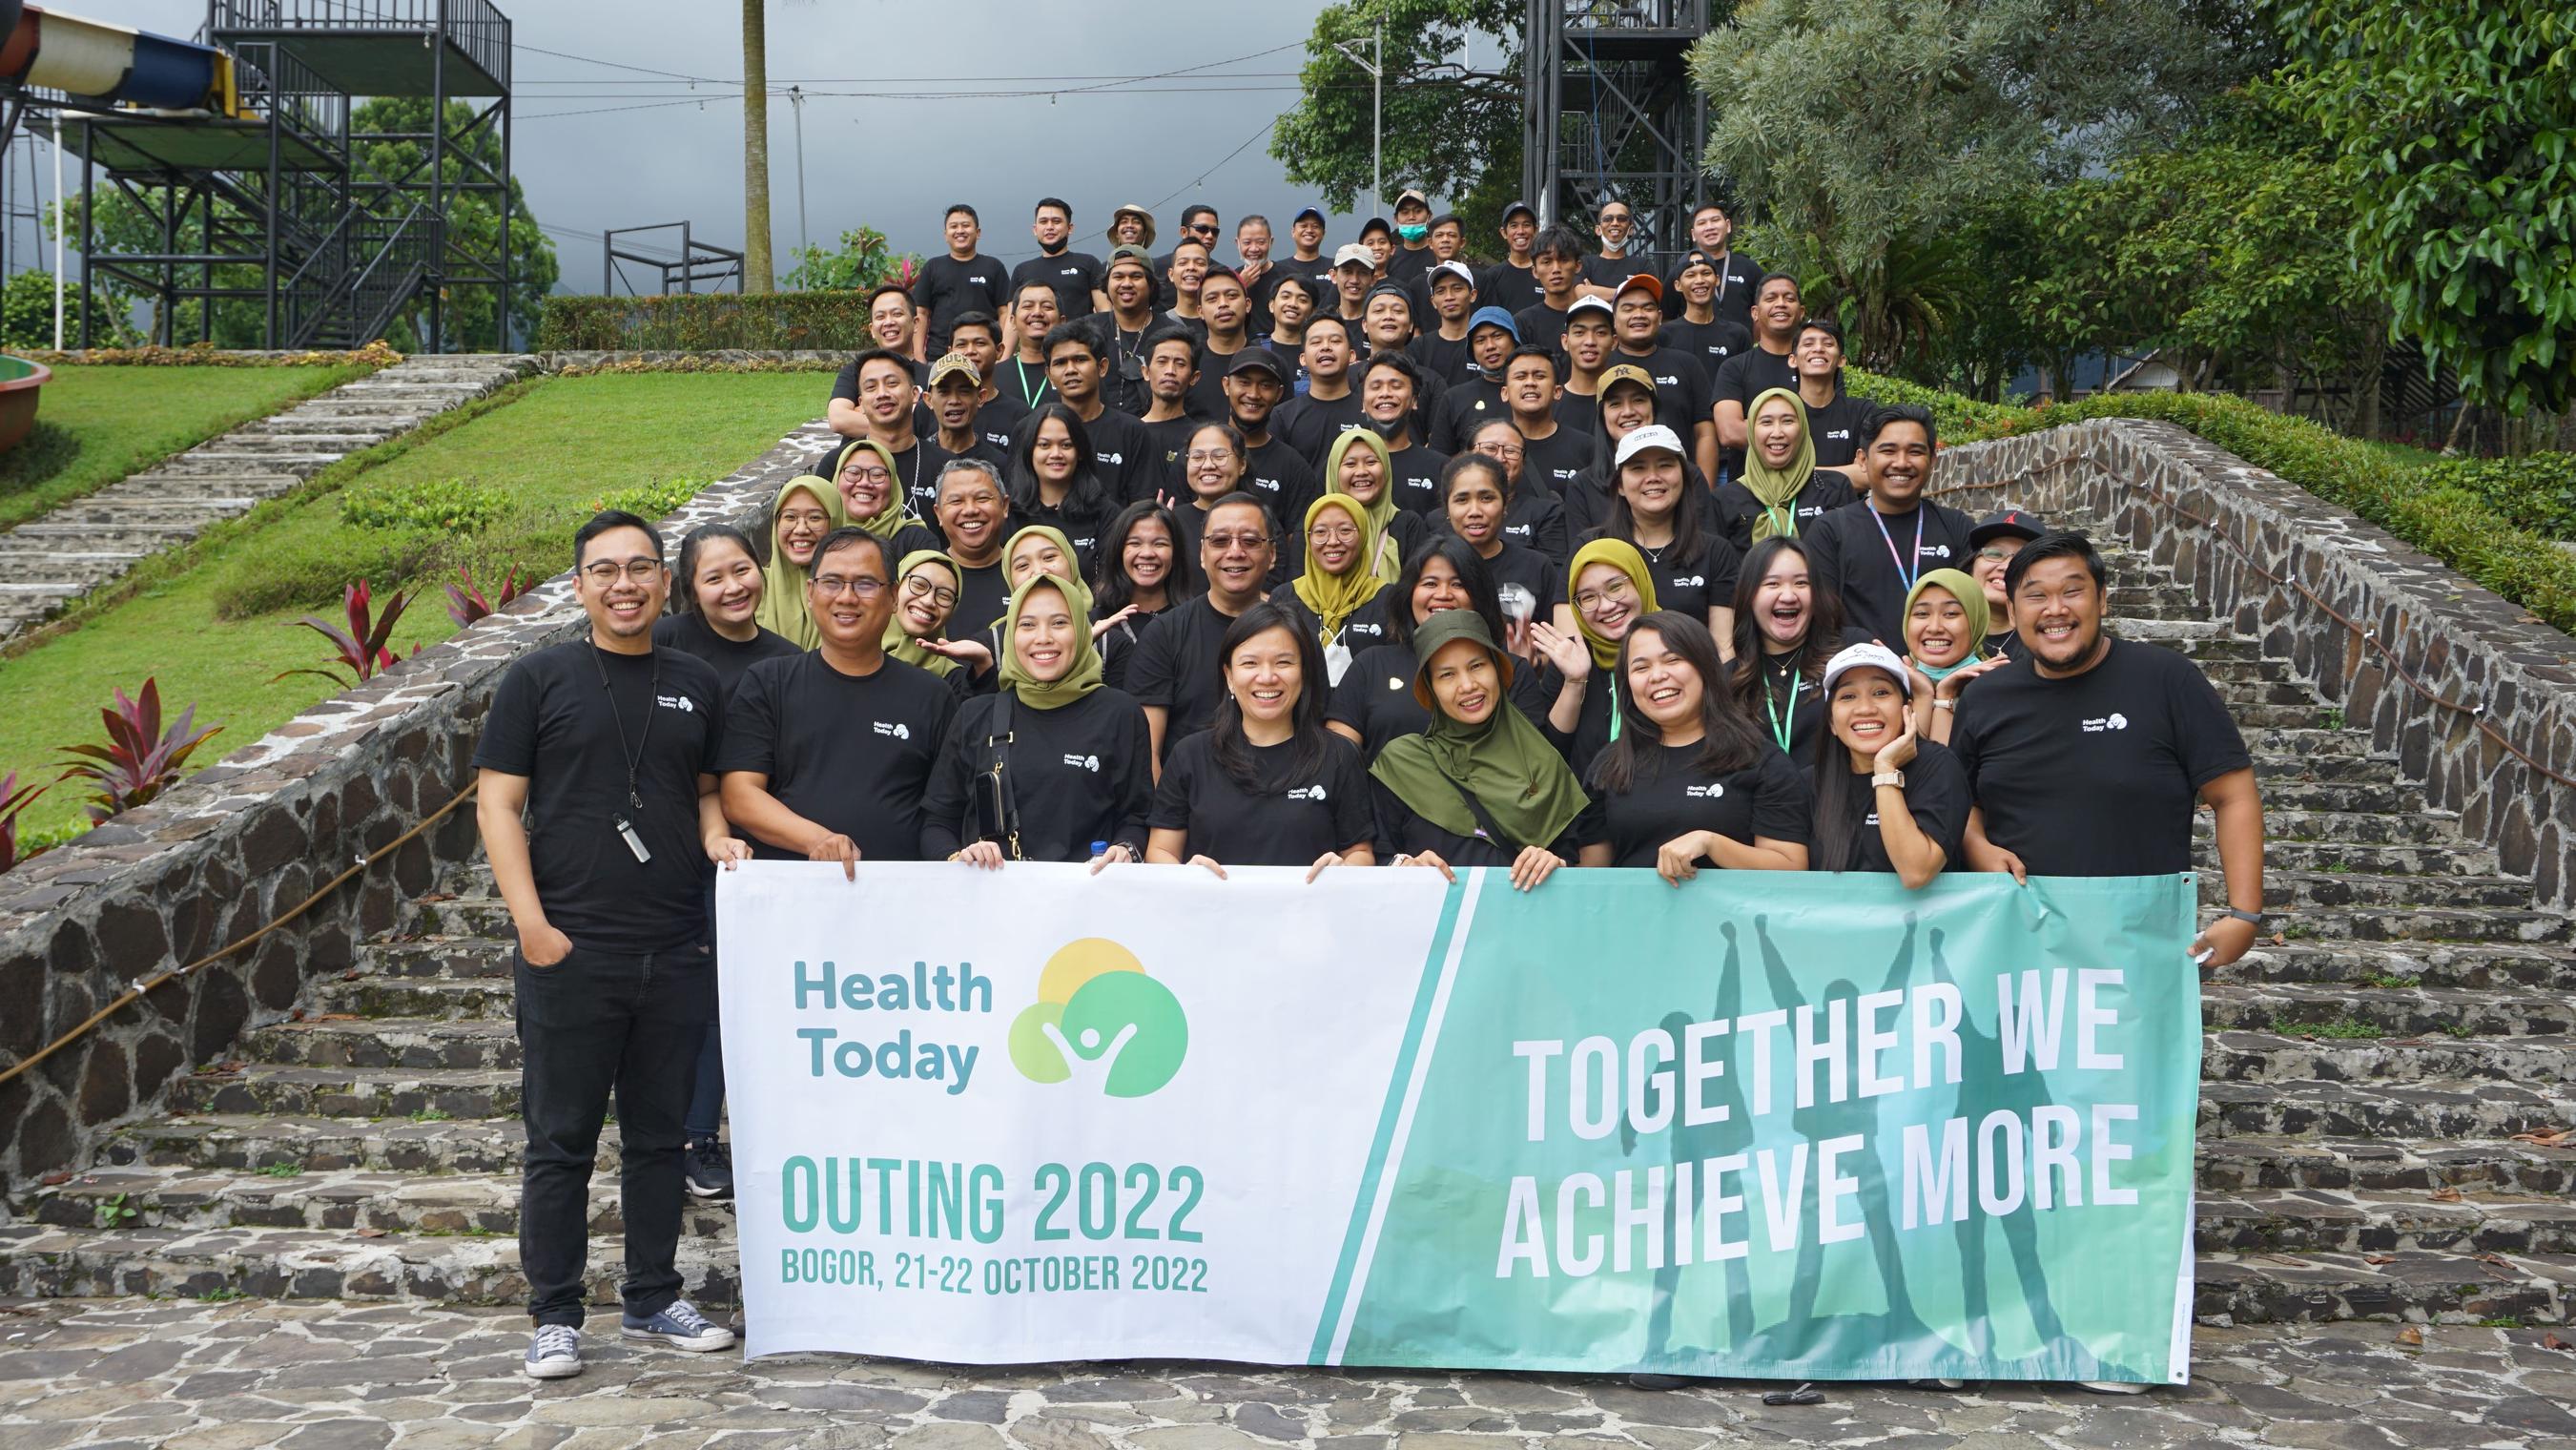 Health Today Outing 2022: Together We Achieve More